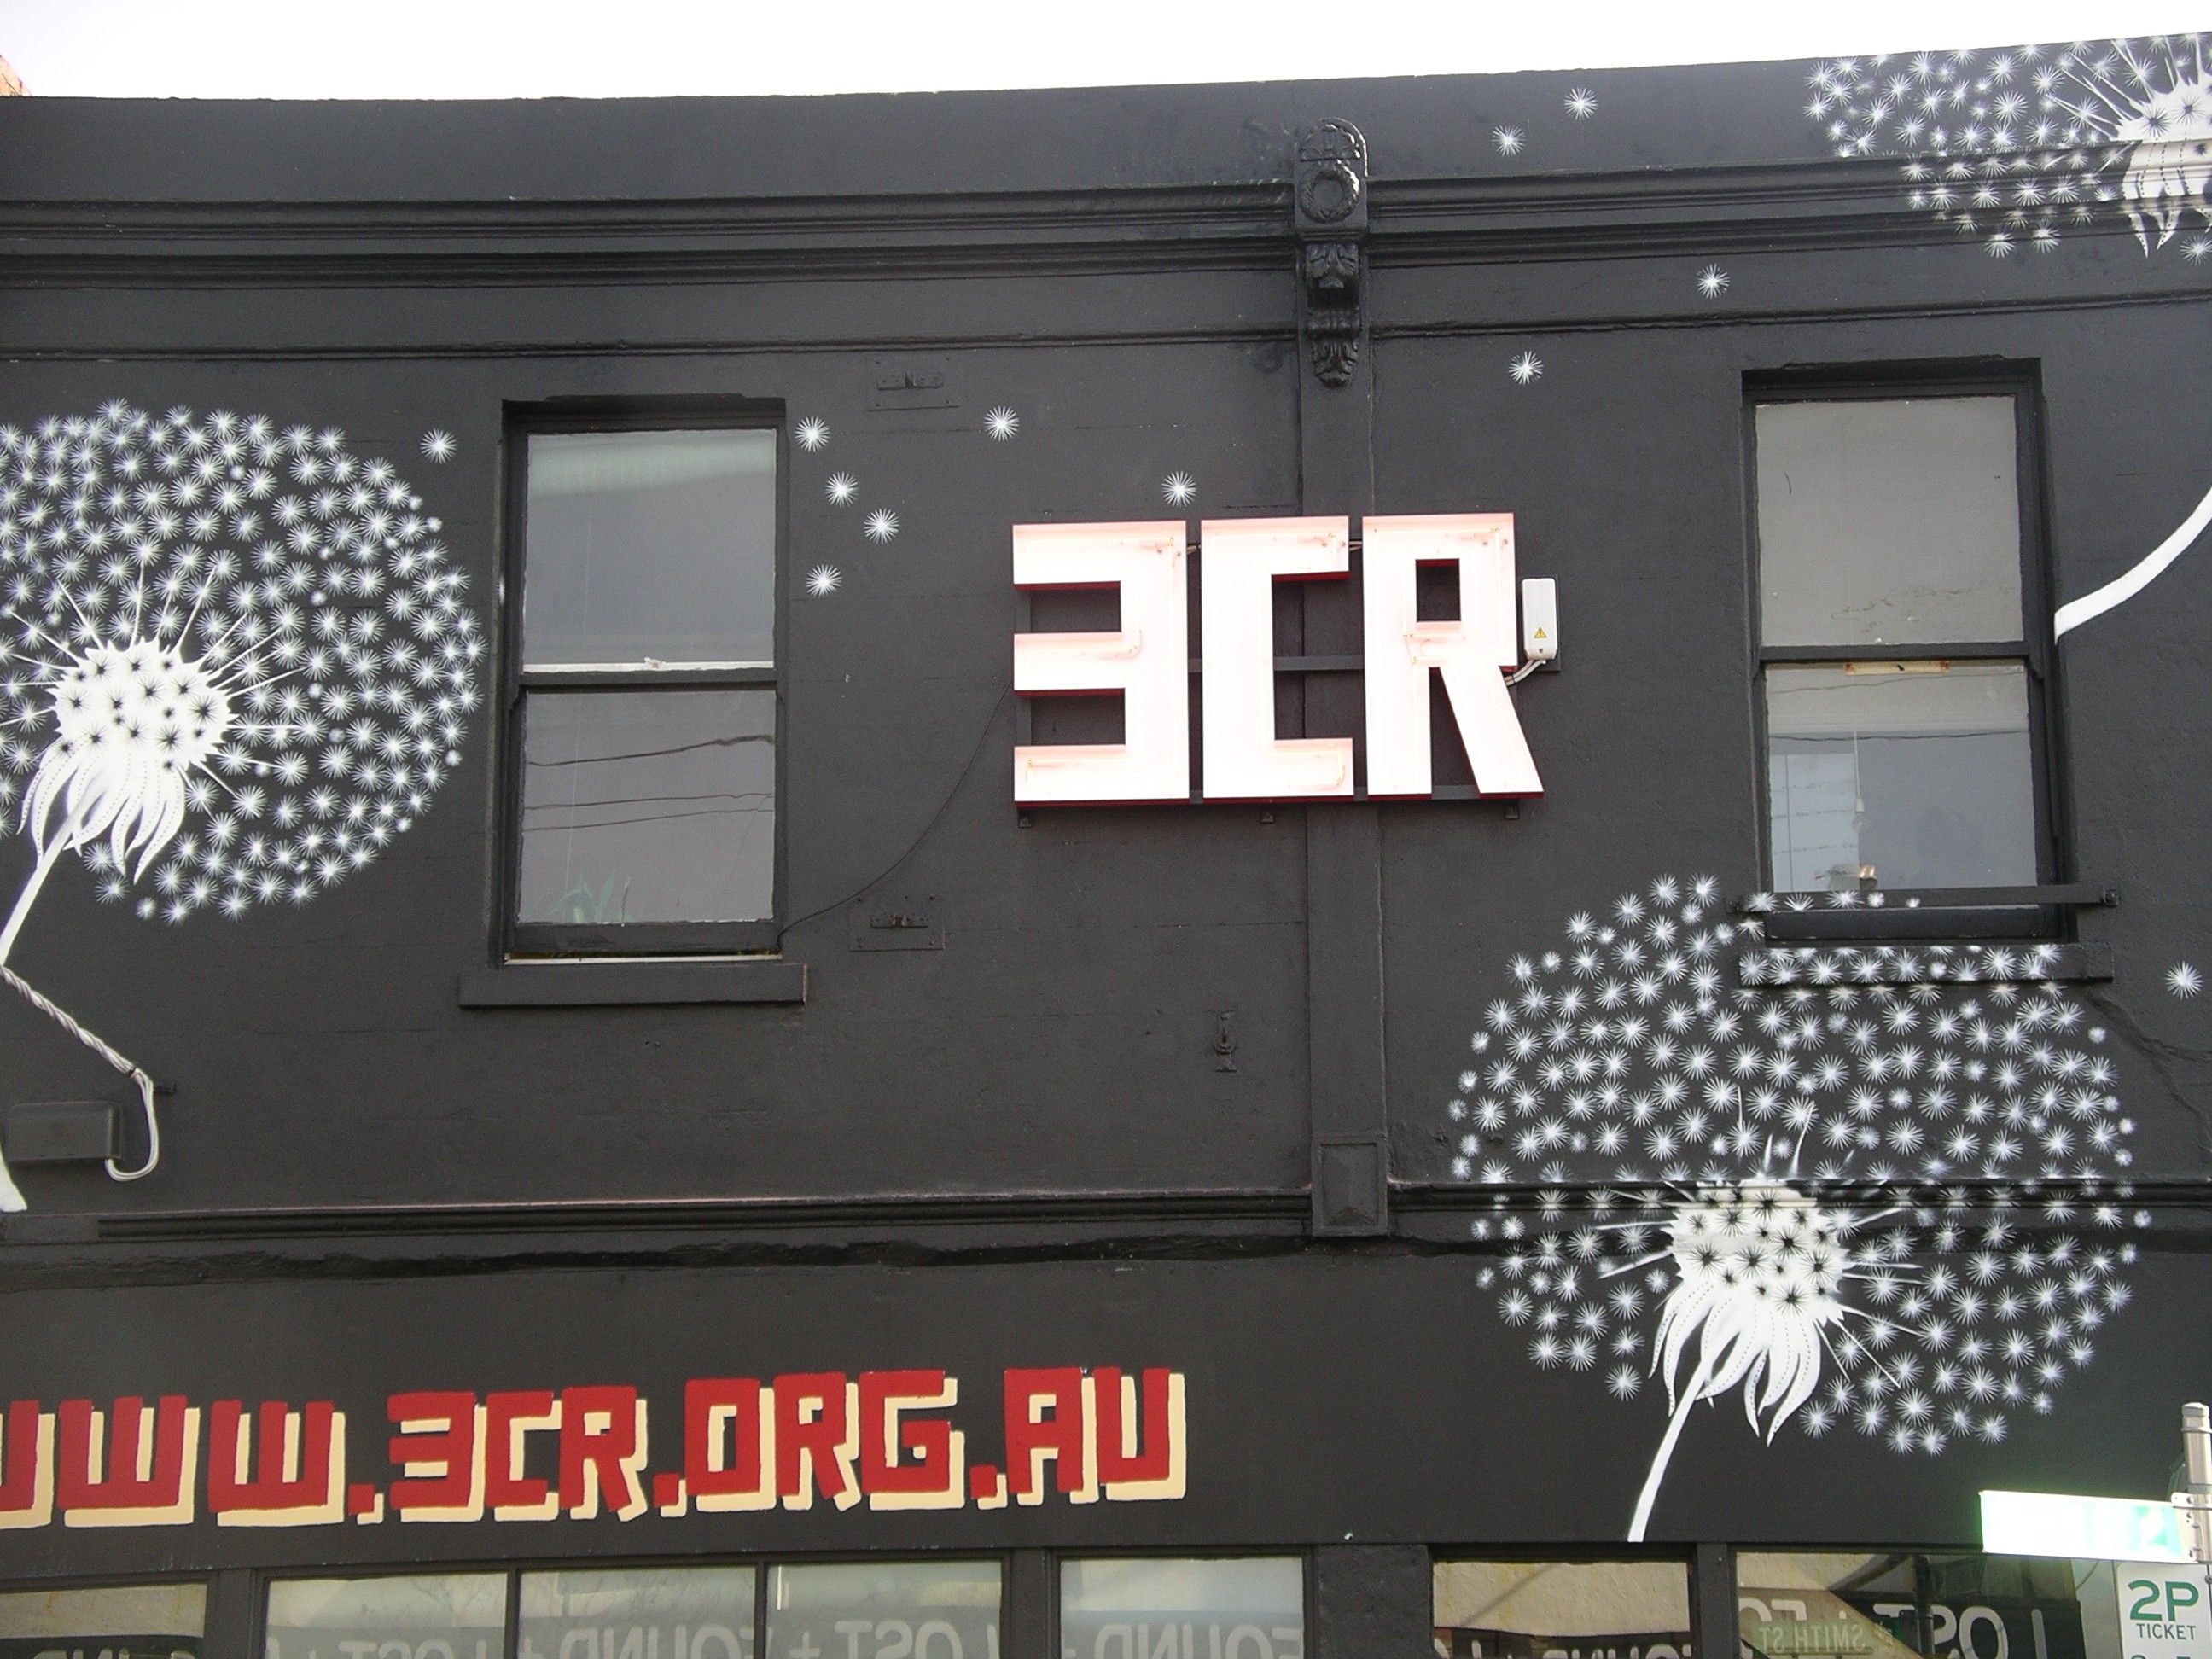 A photograph of the from of the 3CR building in Fitzroy, with large drawings of dandelions, a large neon sign that says 3CR and smaller text painted below which reads www.3cr.org.au